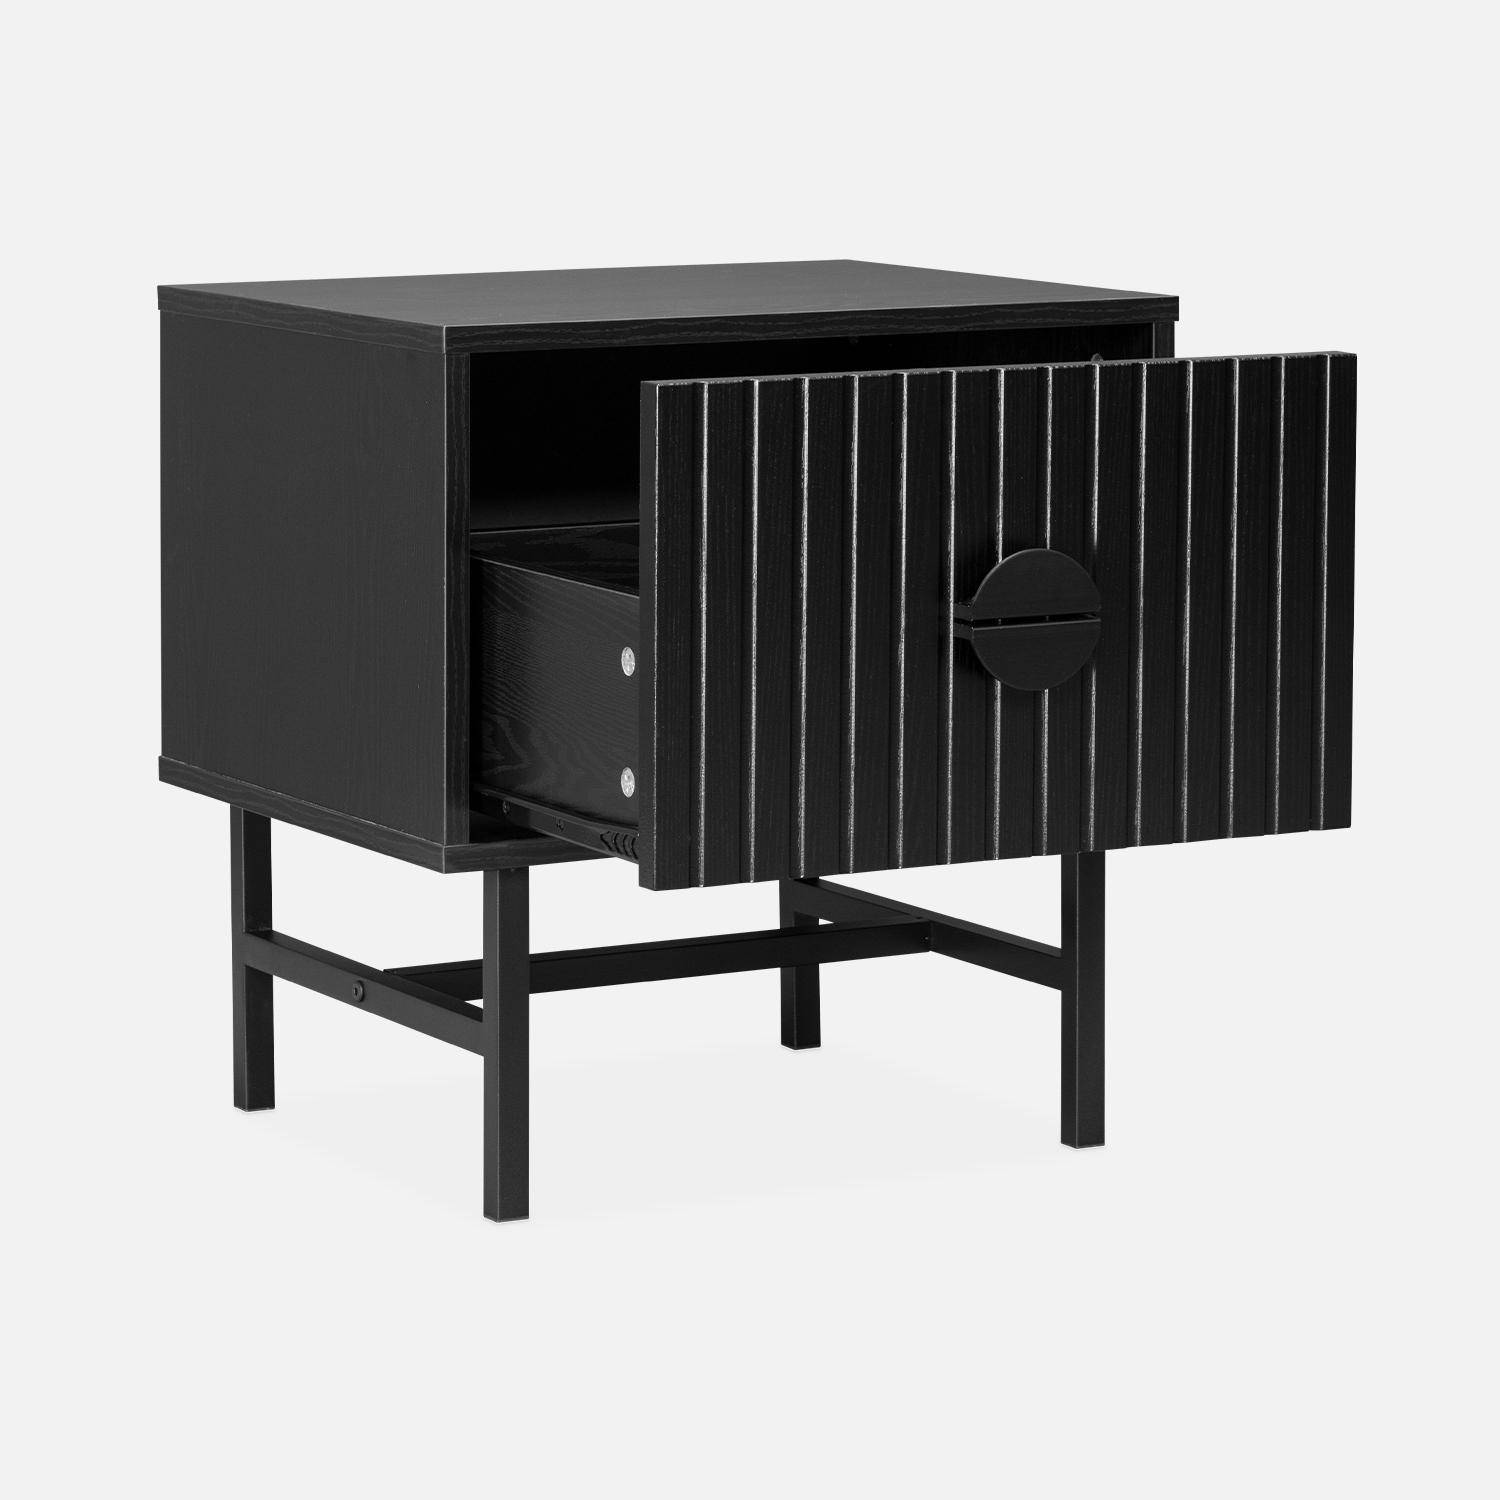 Bedside table with one drawer, ridged effect, industrial style, 48x39x50.3cm - Bazalt - Black,sweeek,Photo6